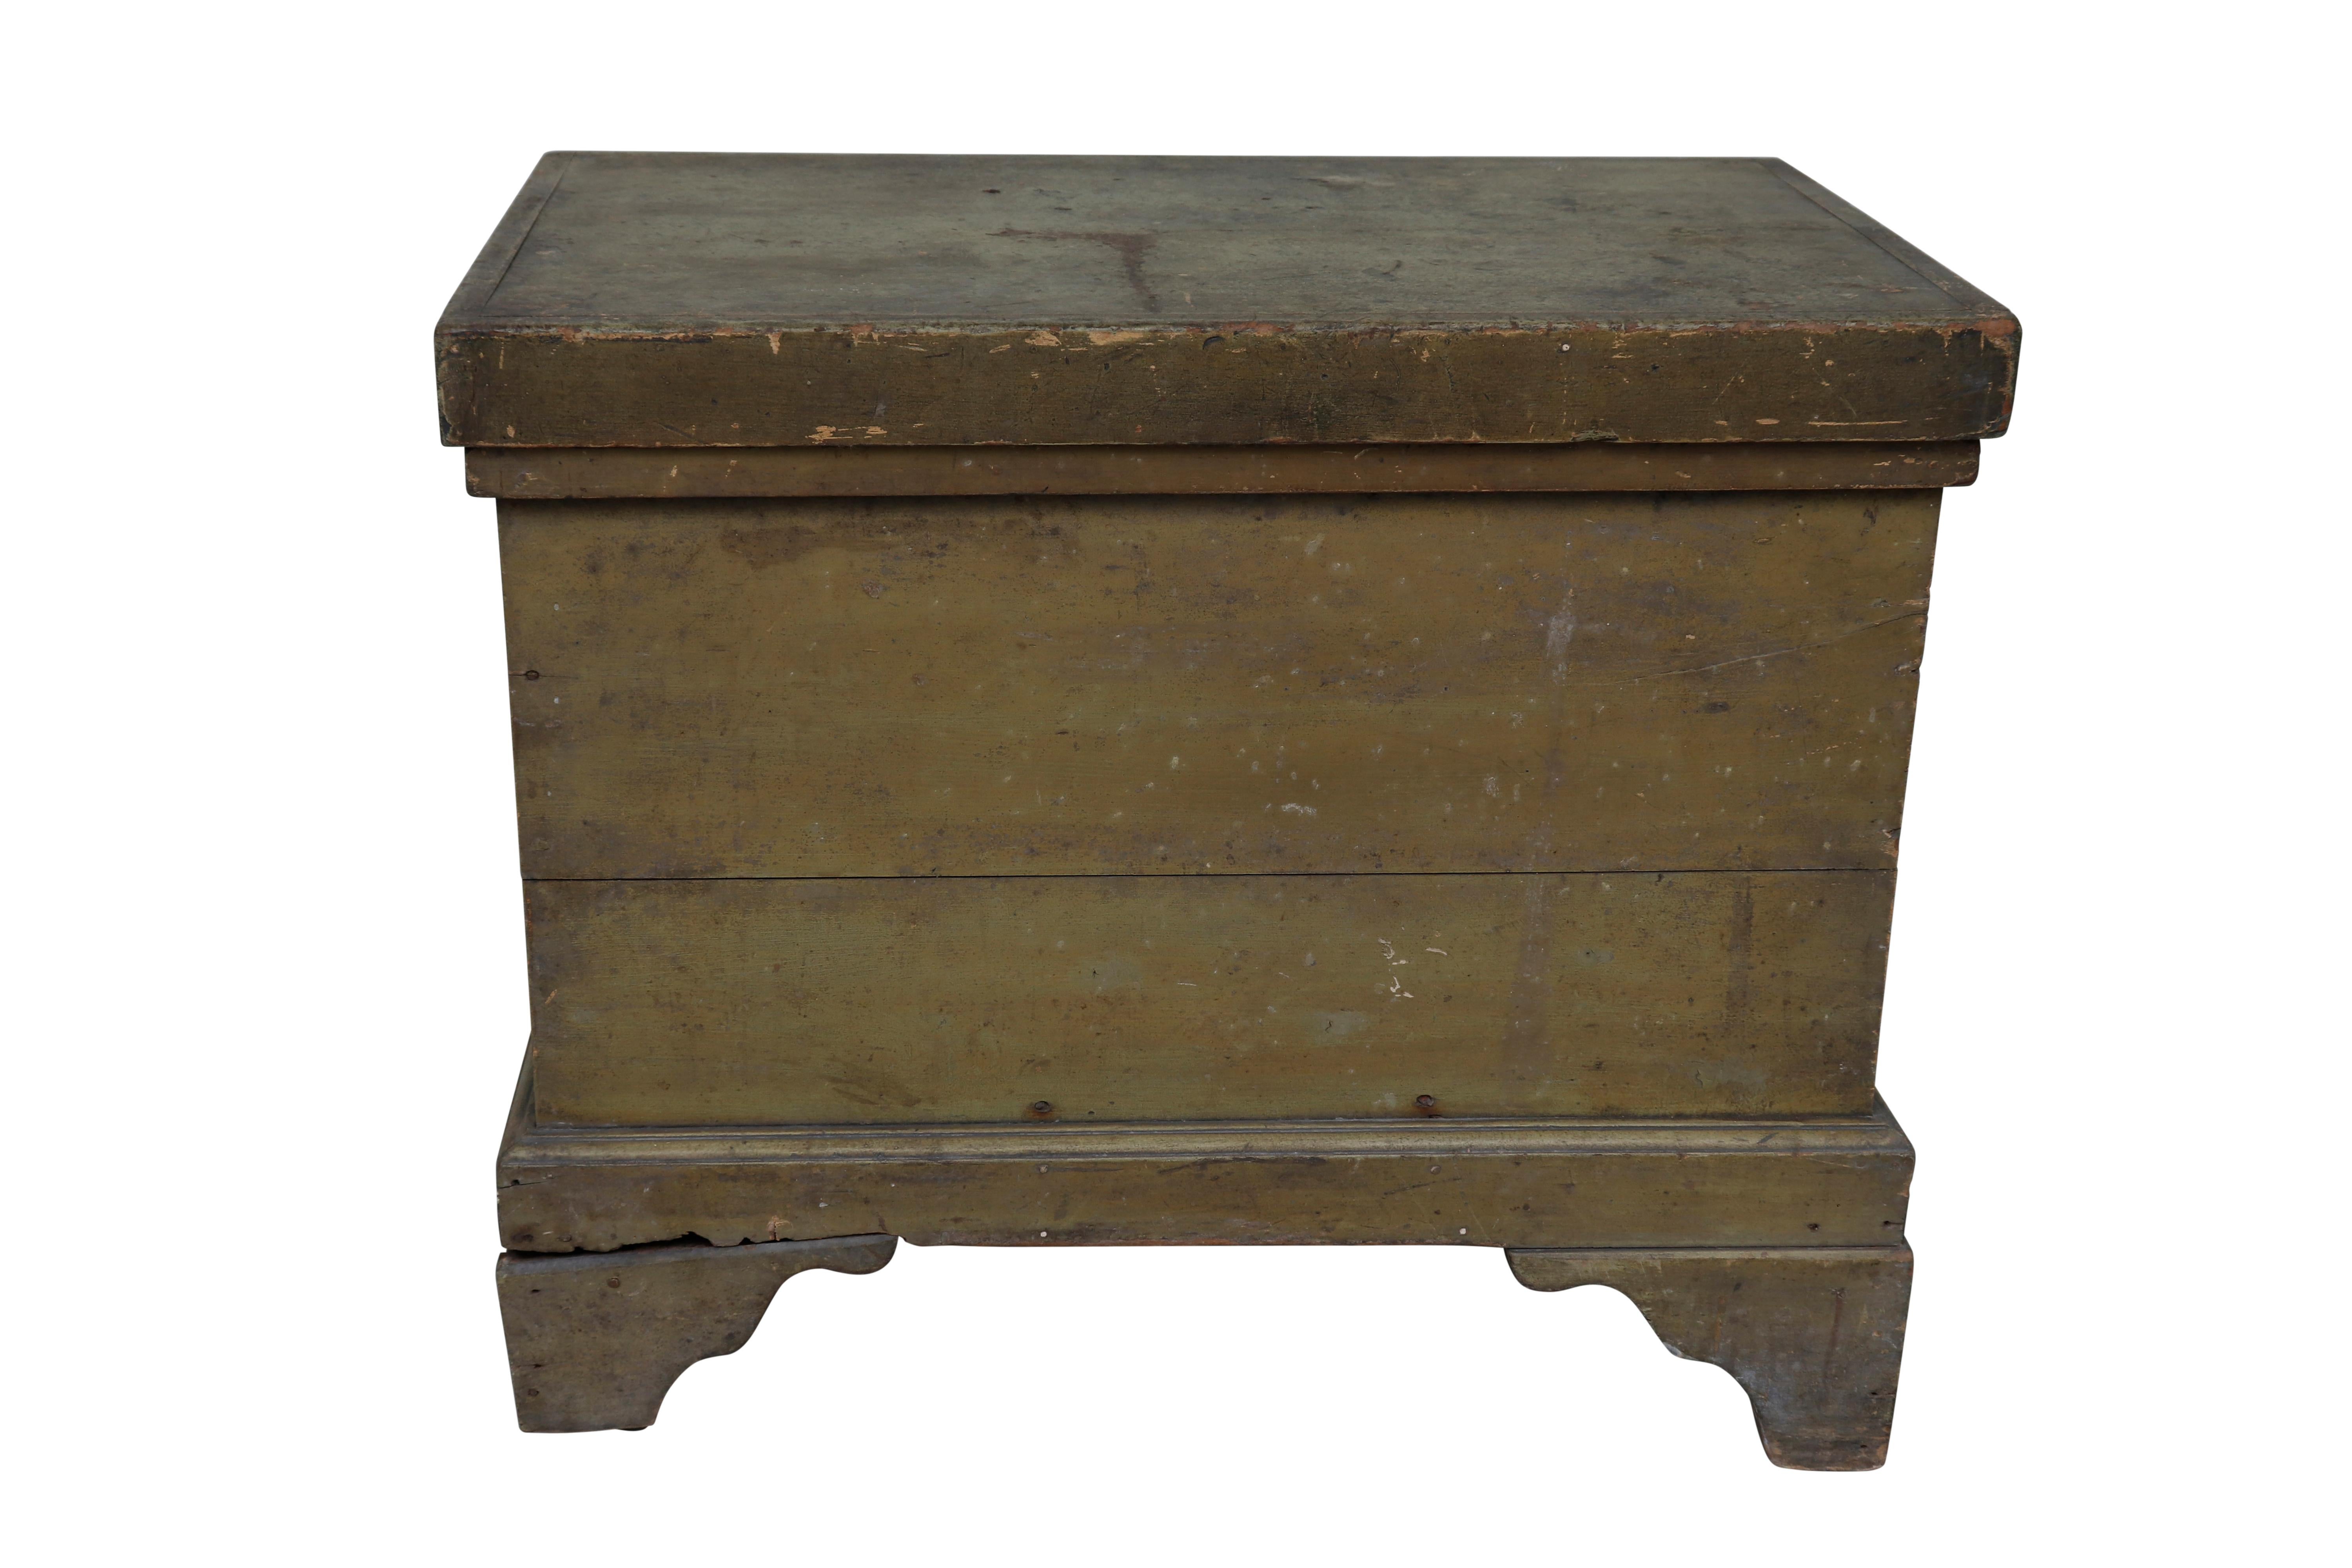 An unusual early American 20th century chest the chest has an interior which houses a zinc lined compartment used for keeping perishables cold
Original green-y mustard paint. The top lifts to reveal the lining used for early refrigerating unique